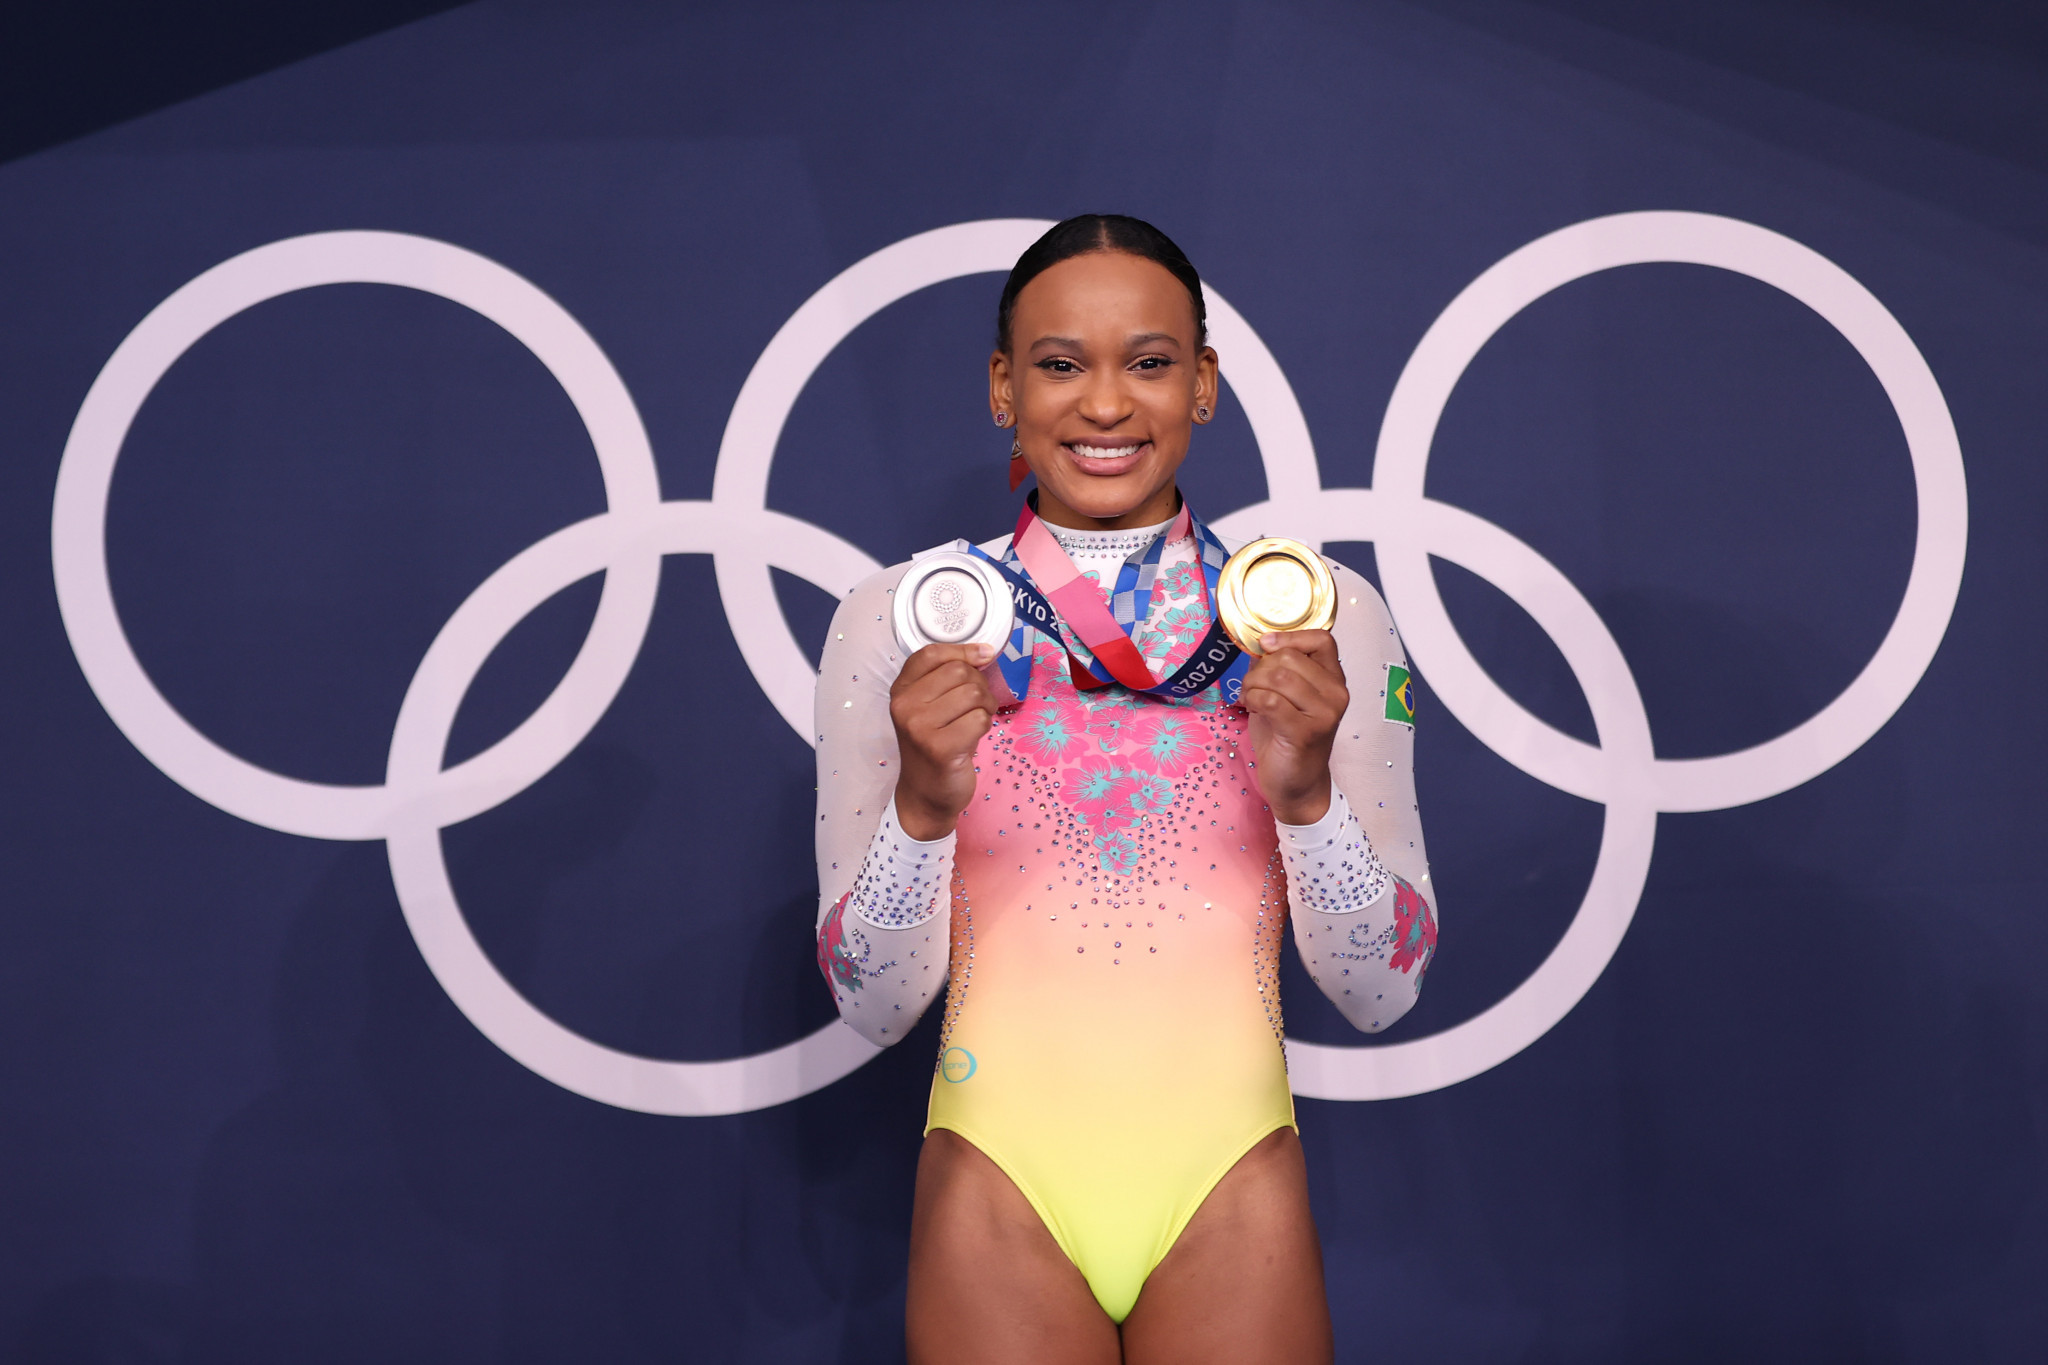 Rebeca Andrade won silver and gold at Tokyo 2020 ©Getty Images